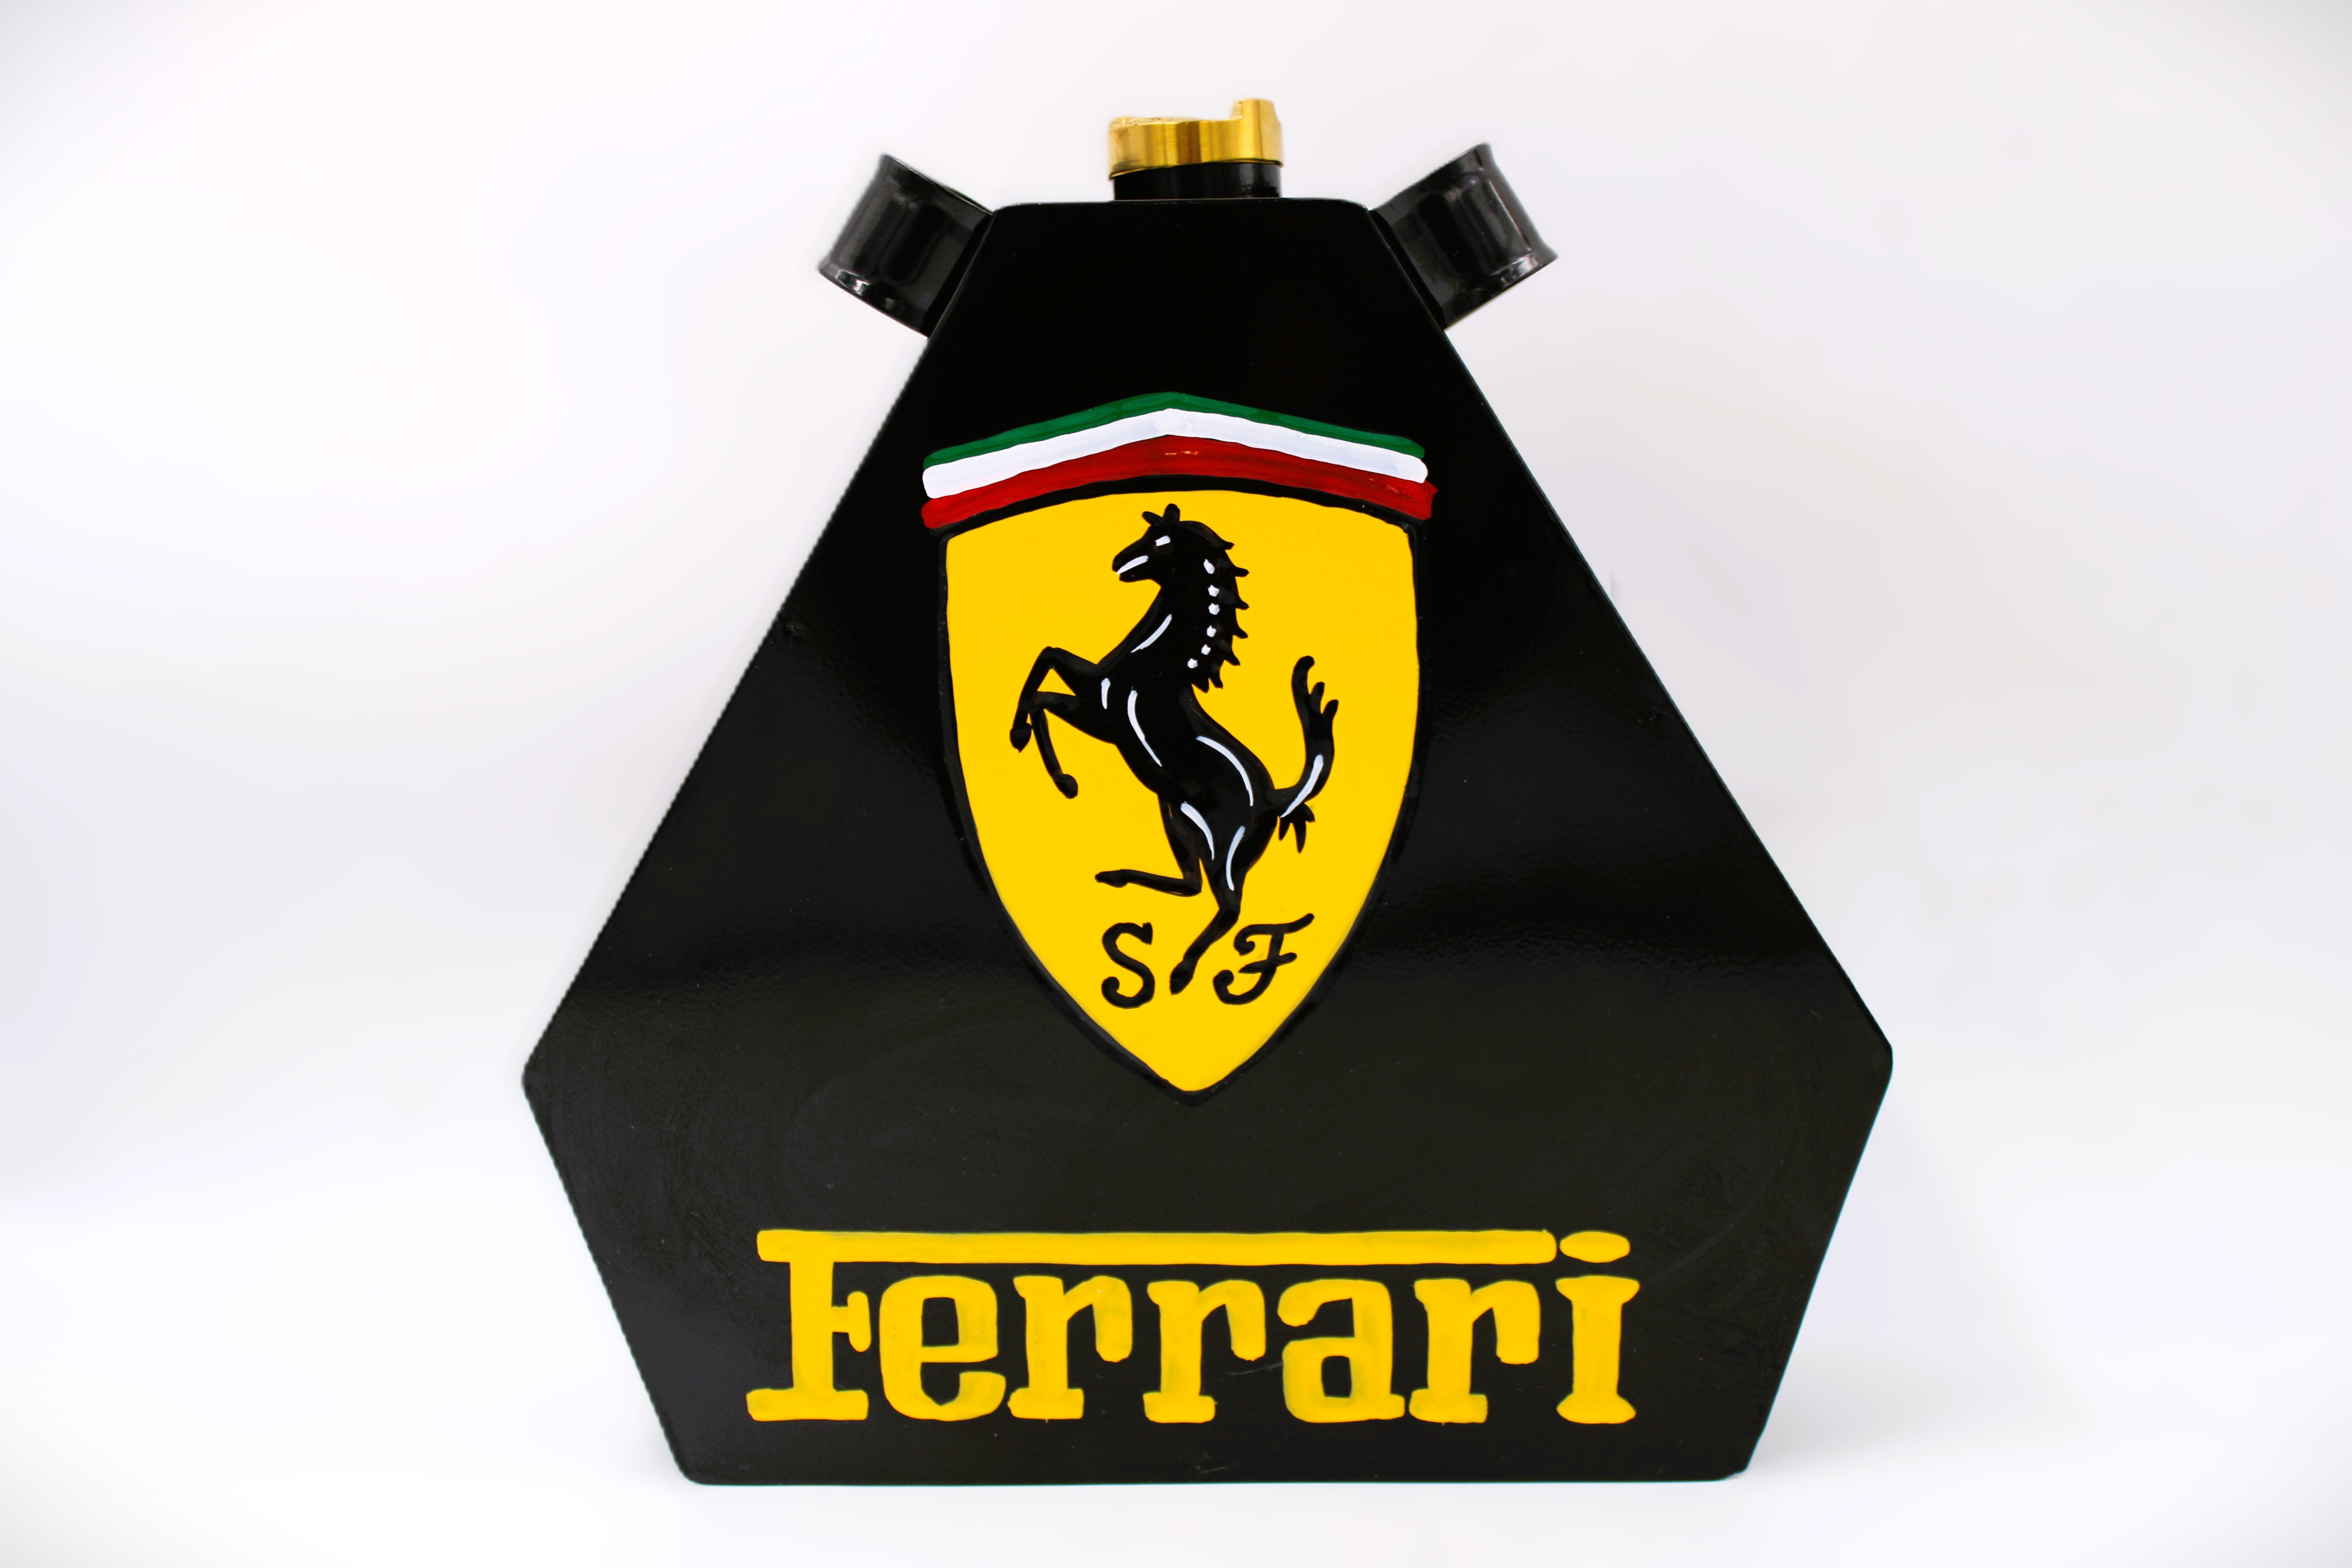 Black and yellow painted gas can with the Ferrari logo displayed.